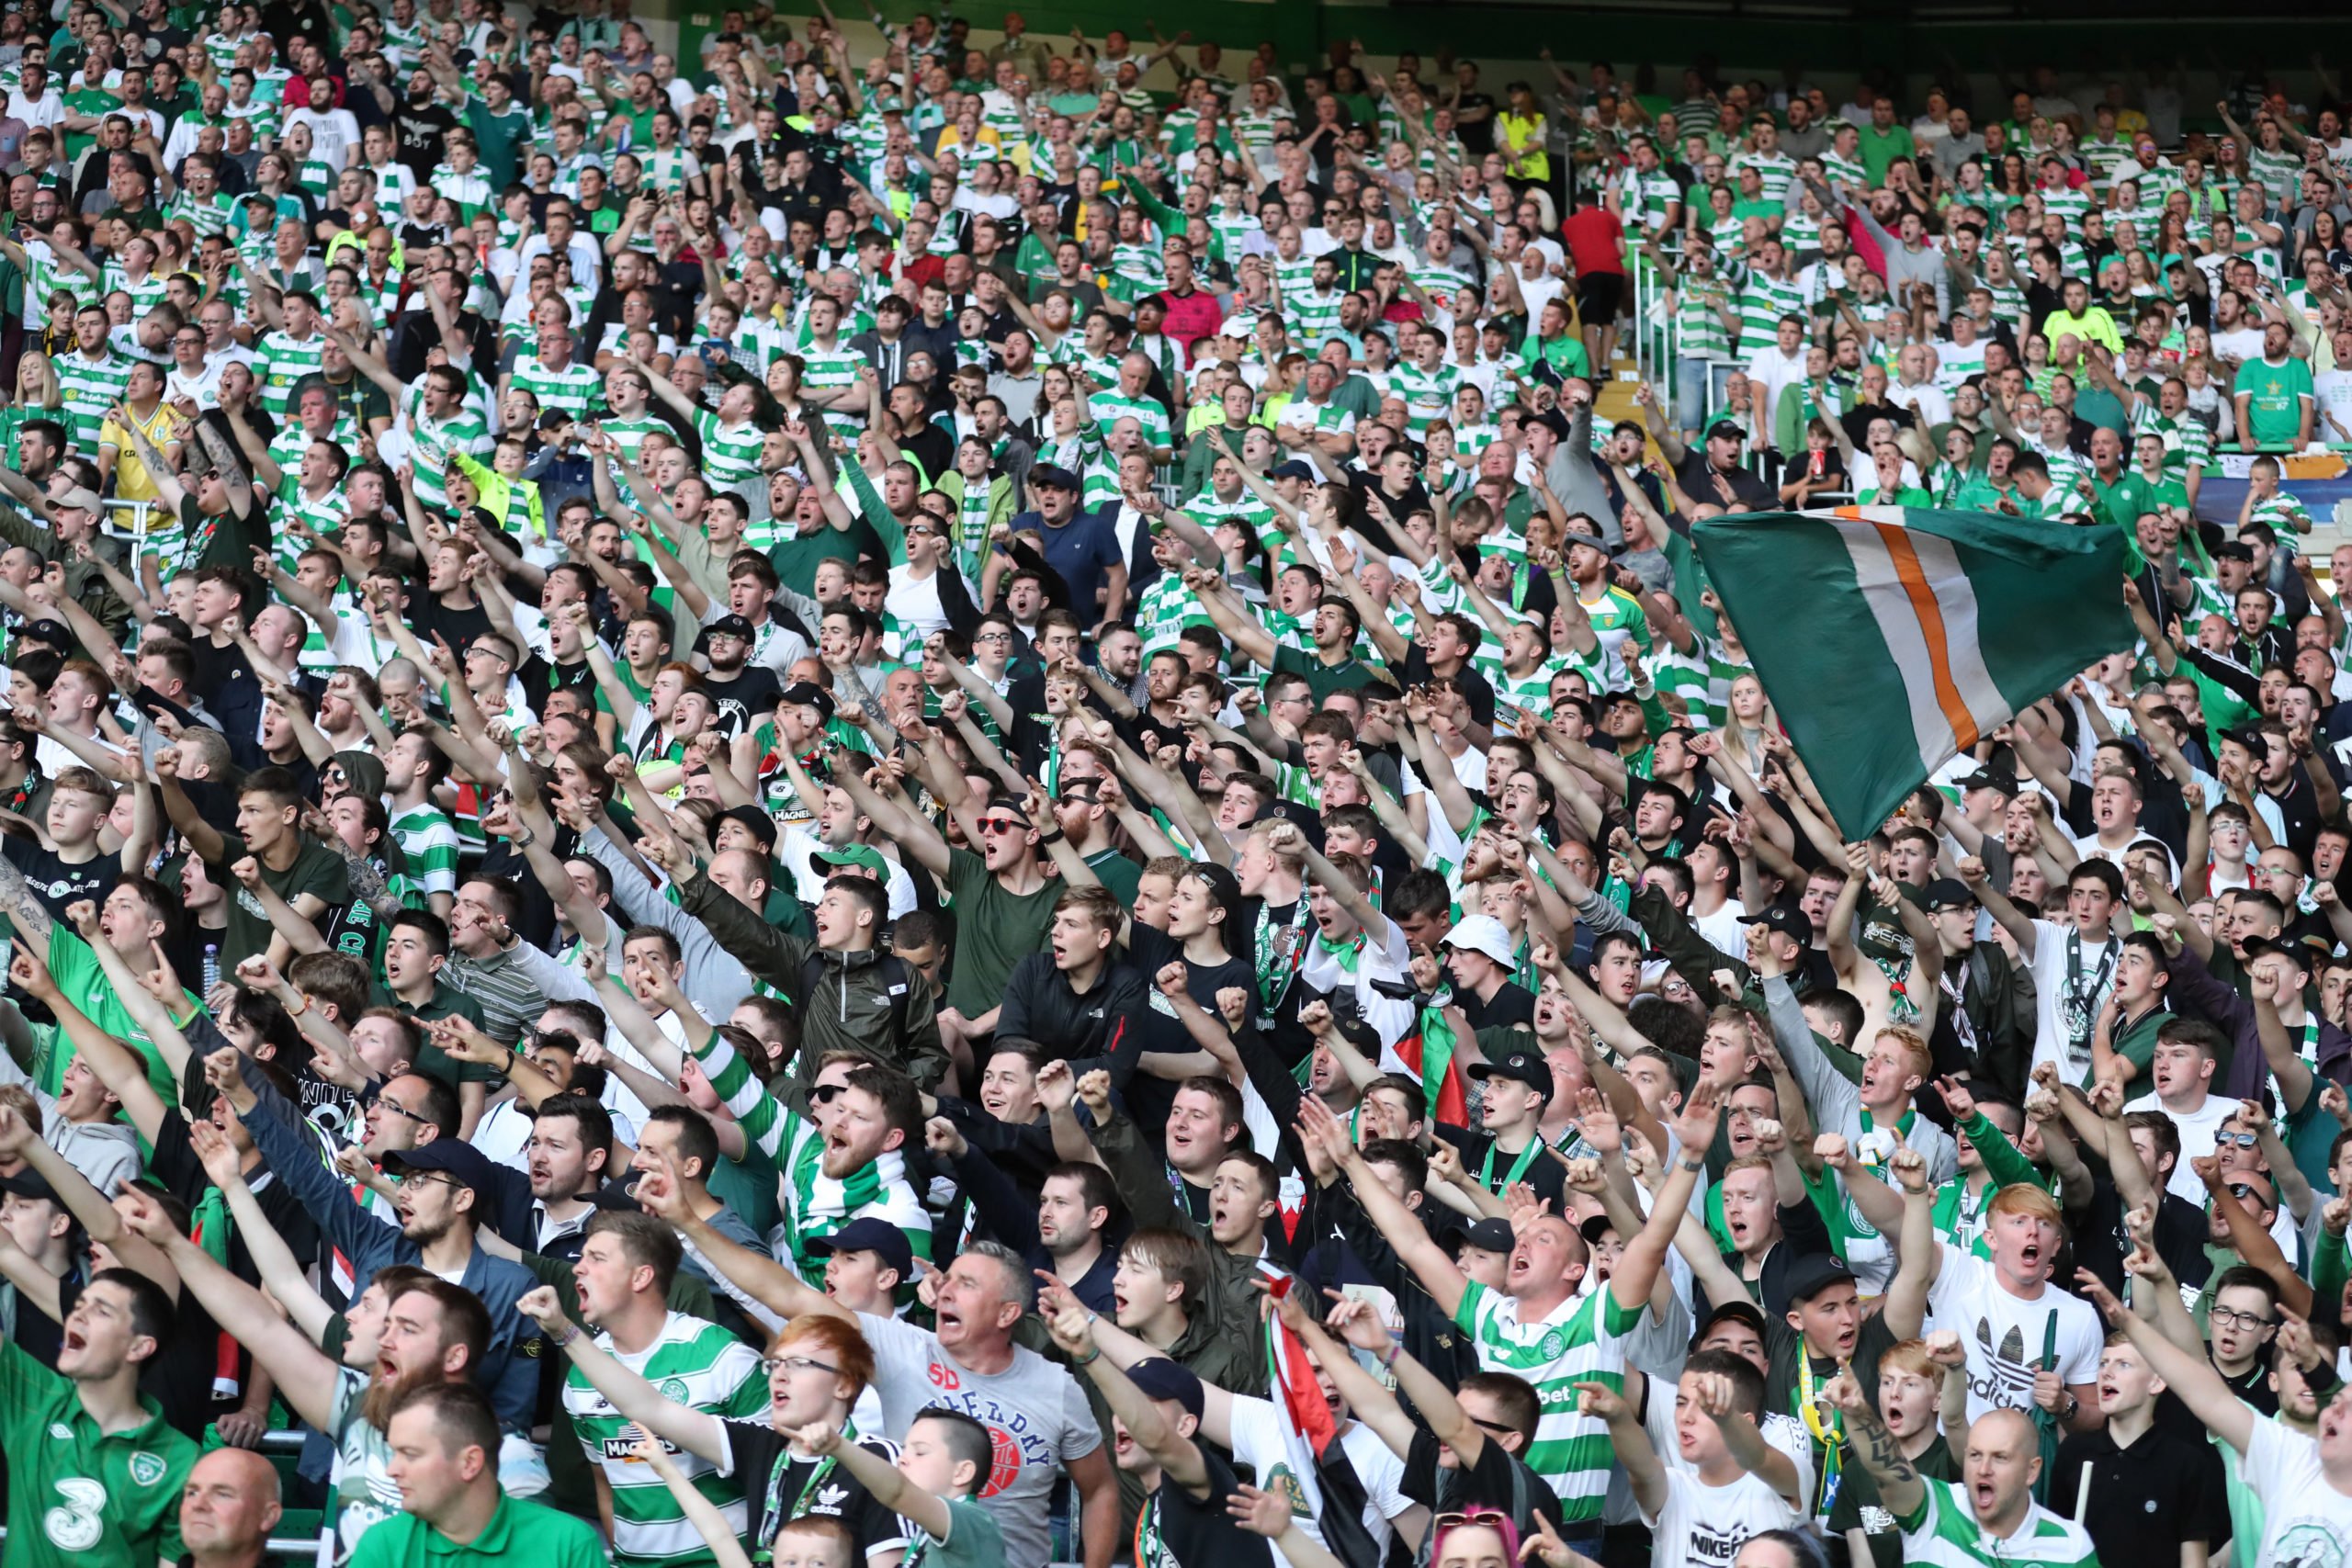 The Celtic fans have effectively funded the rebuild; time for club to get moving